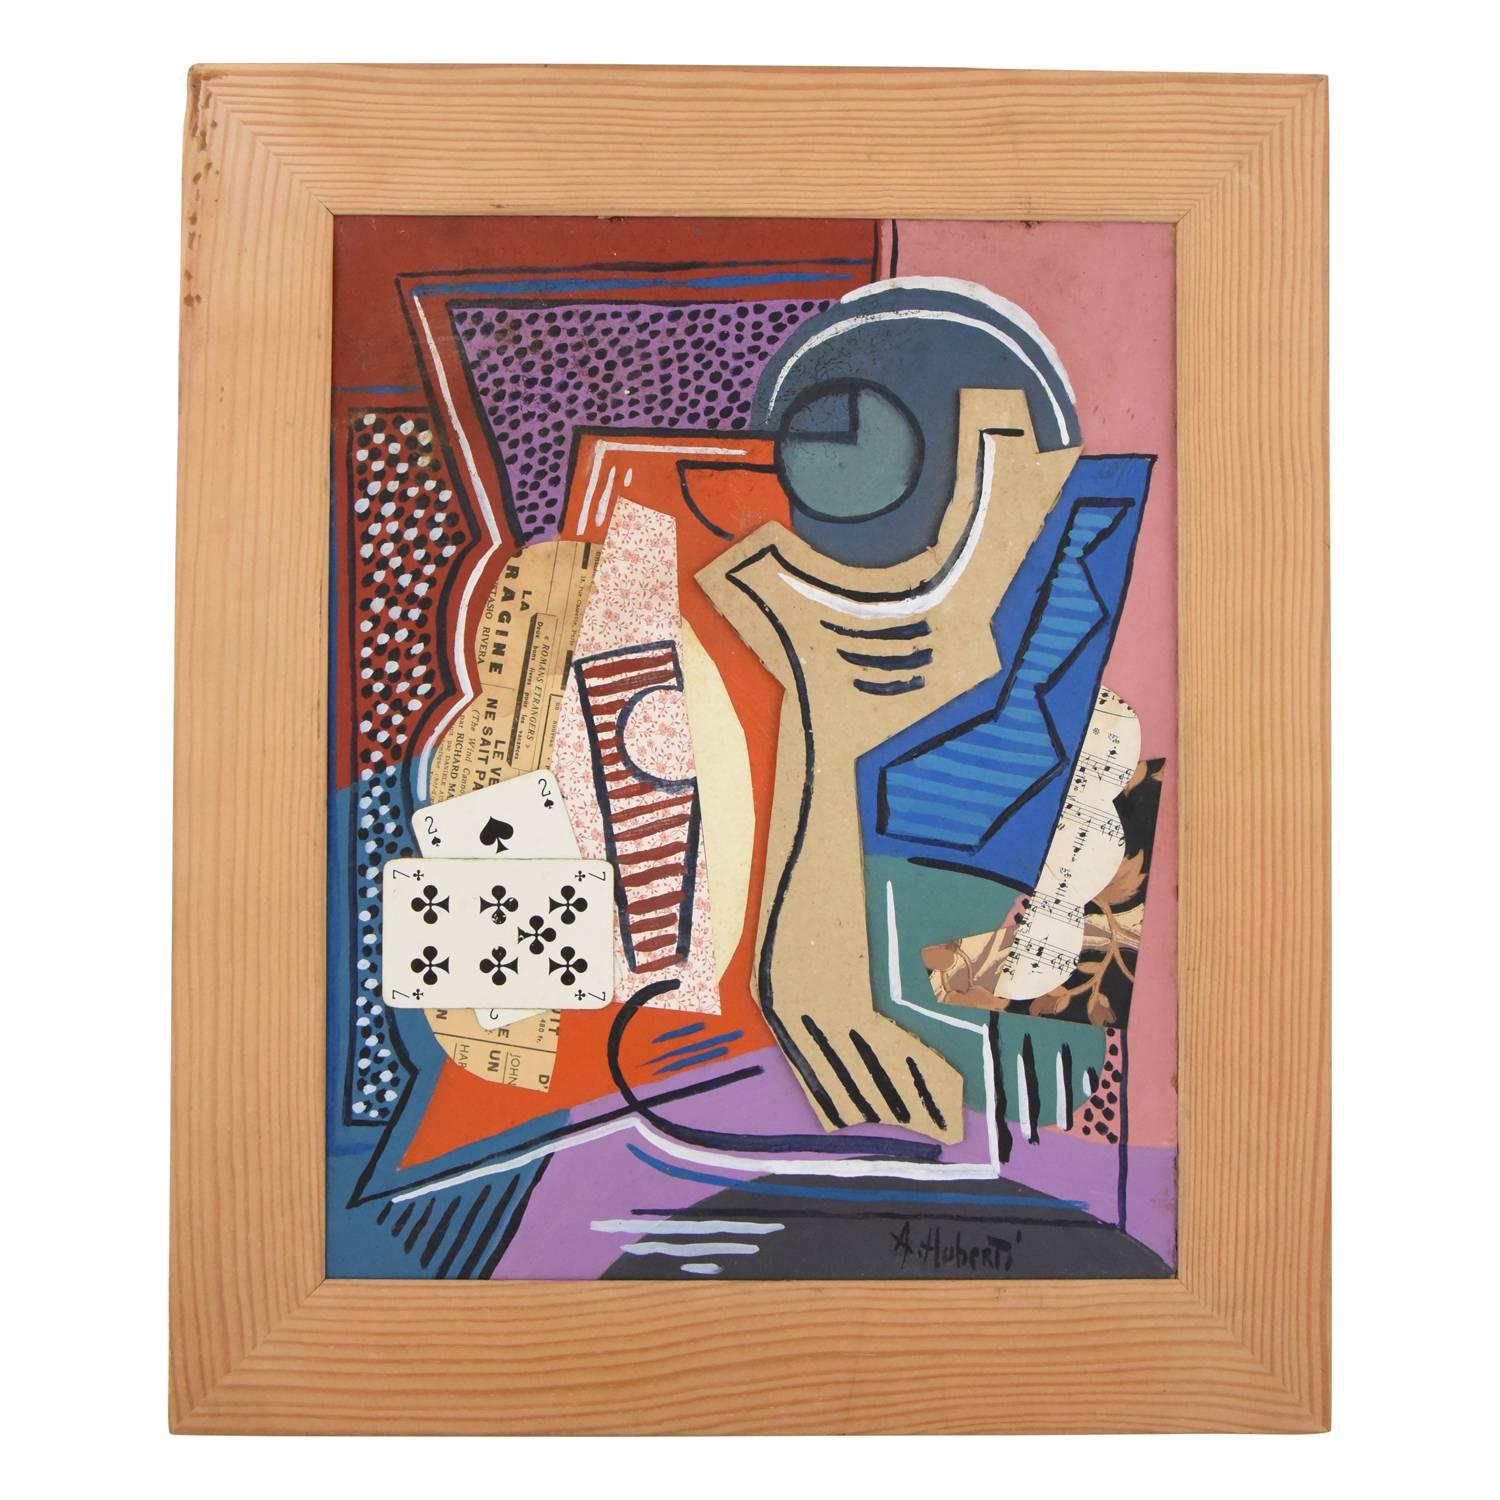   Cubist Collage with Playing Cards and Staff Paper Antonio Huberti 1940 France